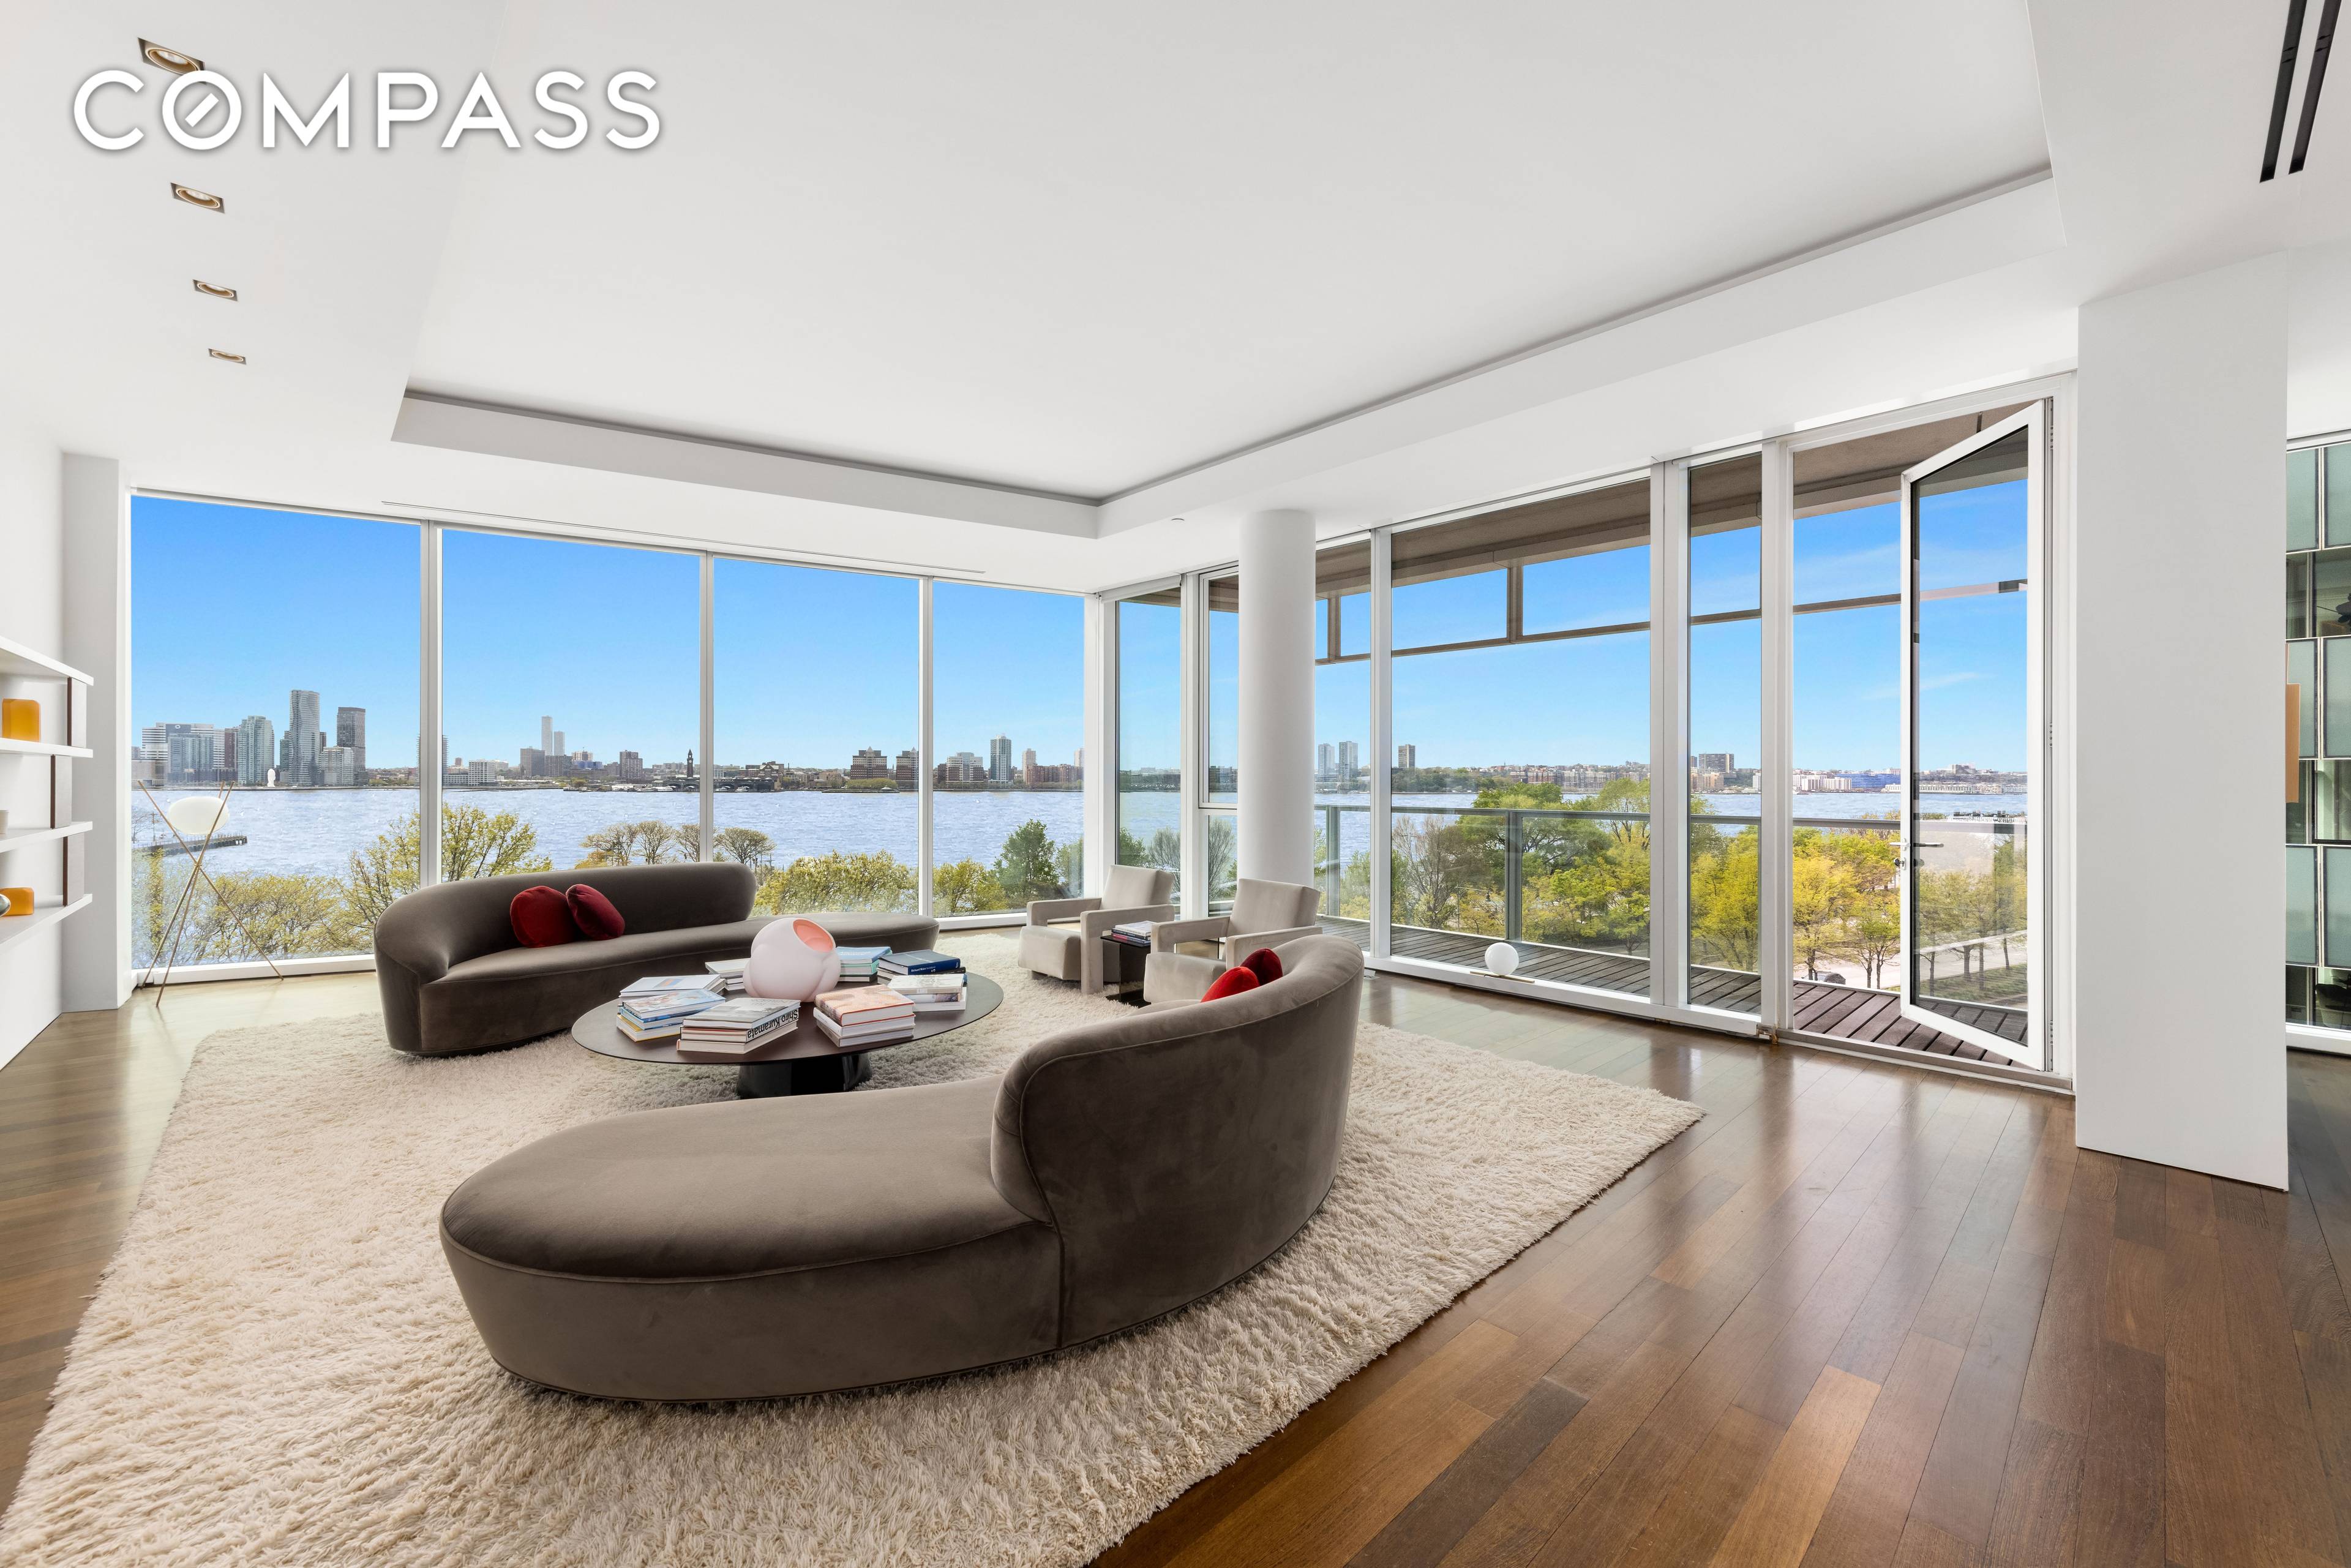 Let your imagination blossom with this rare and unparalleled combination opportunity in one of Manhattan's most prestigious condos designed by Pritzker Prize winning architect Richard Meier.